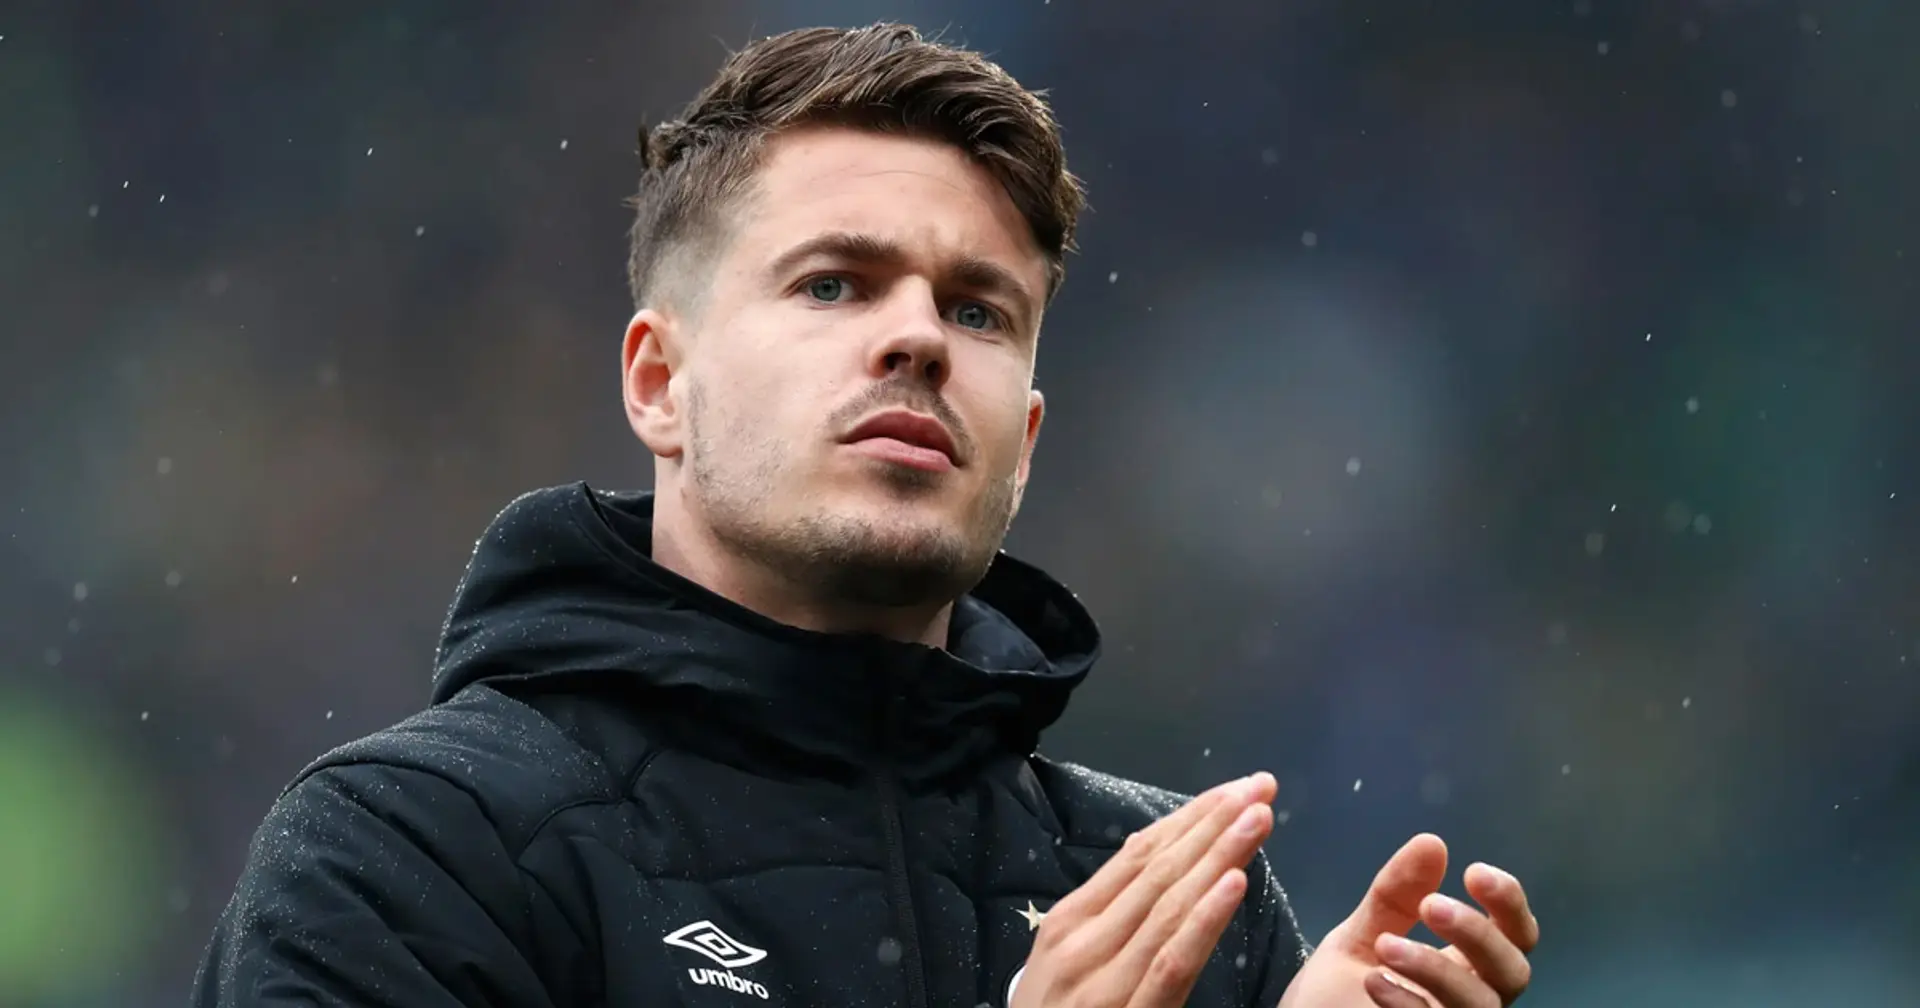 'It's quite something and in these uncertain times as well': Van Ginkel's story proves Chelsea FC is one big family